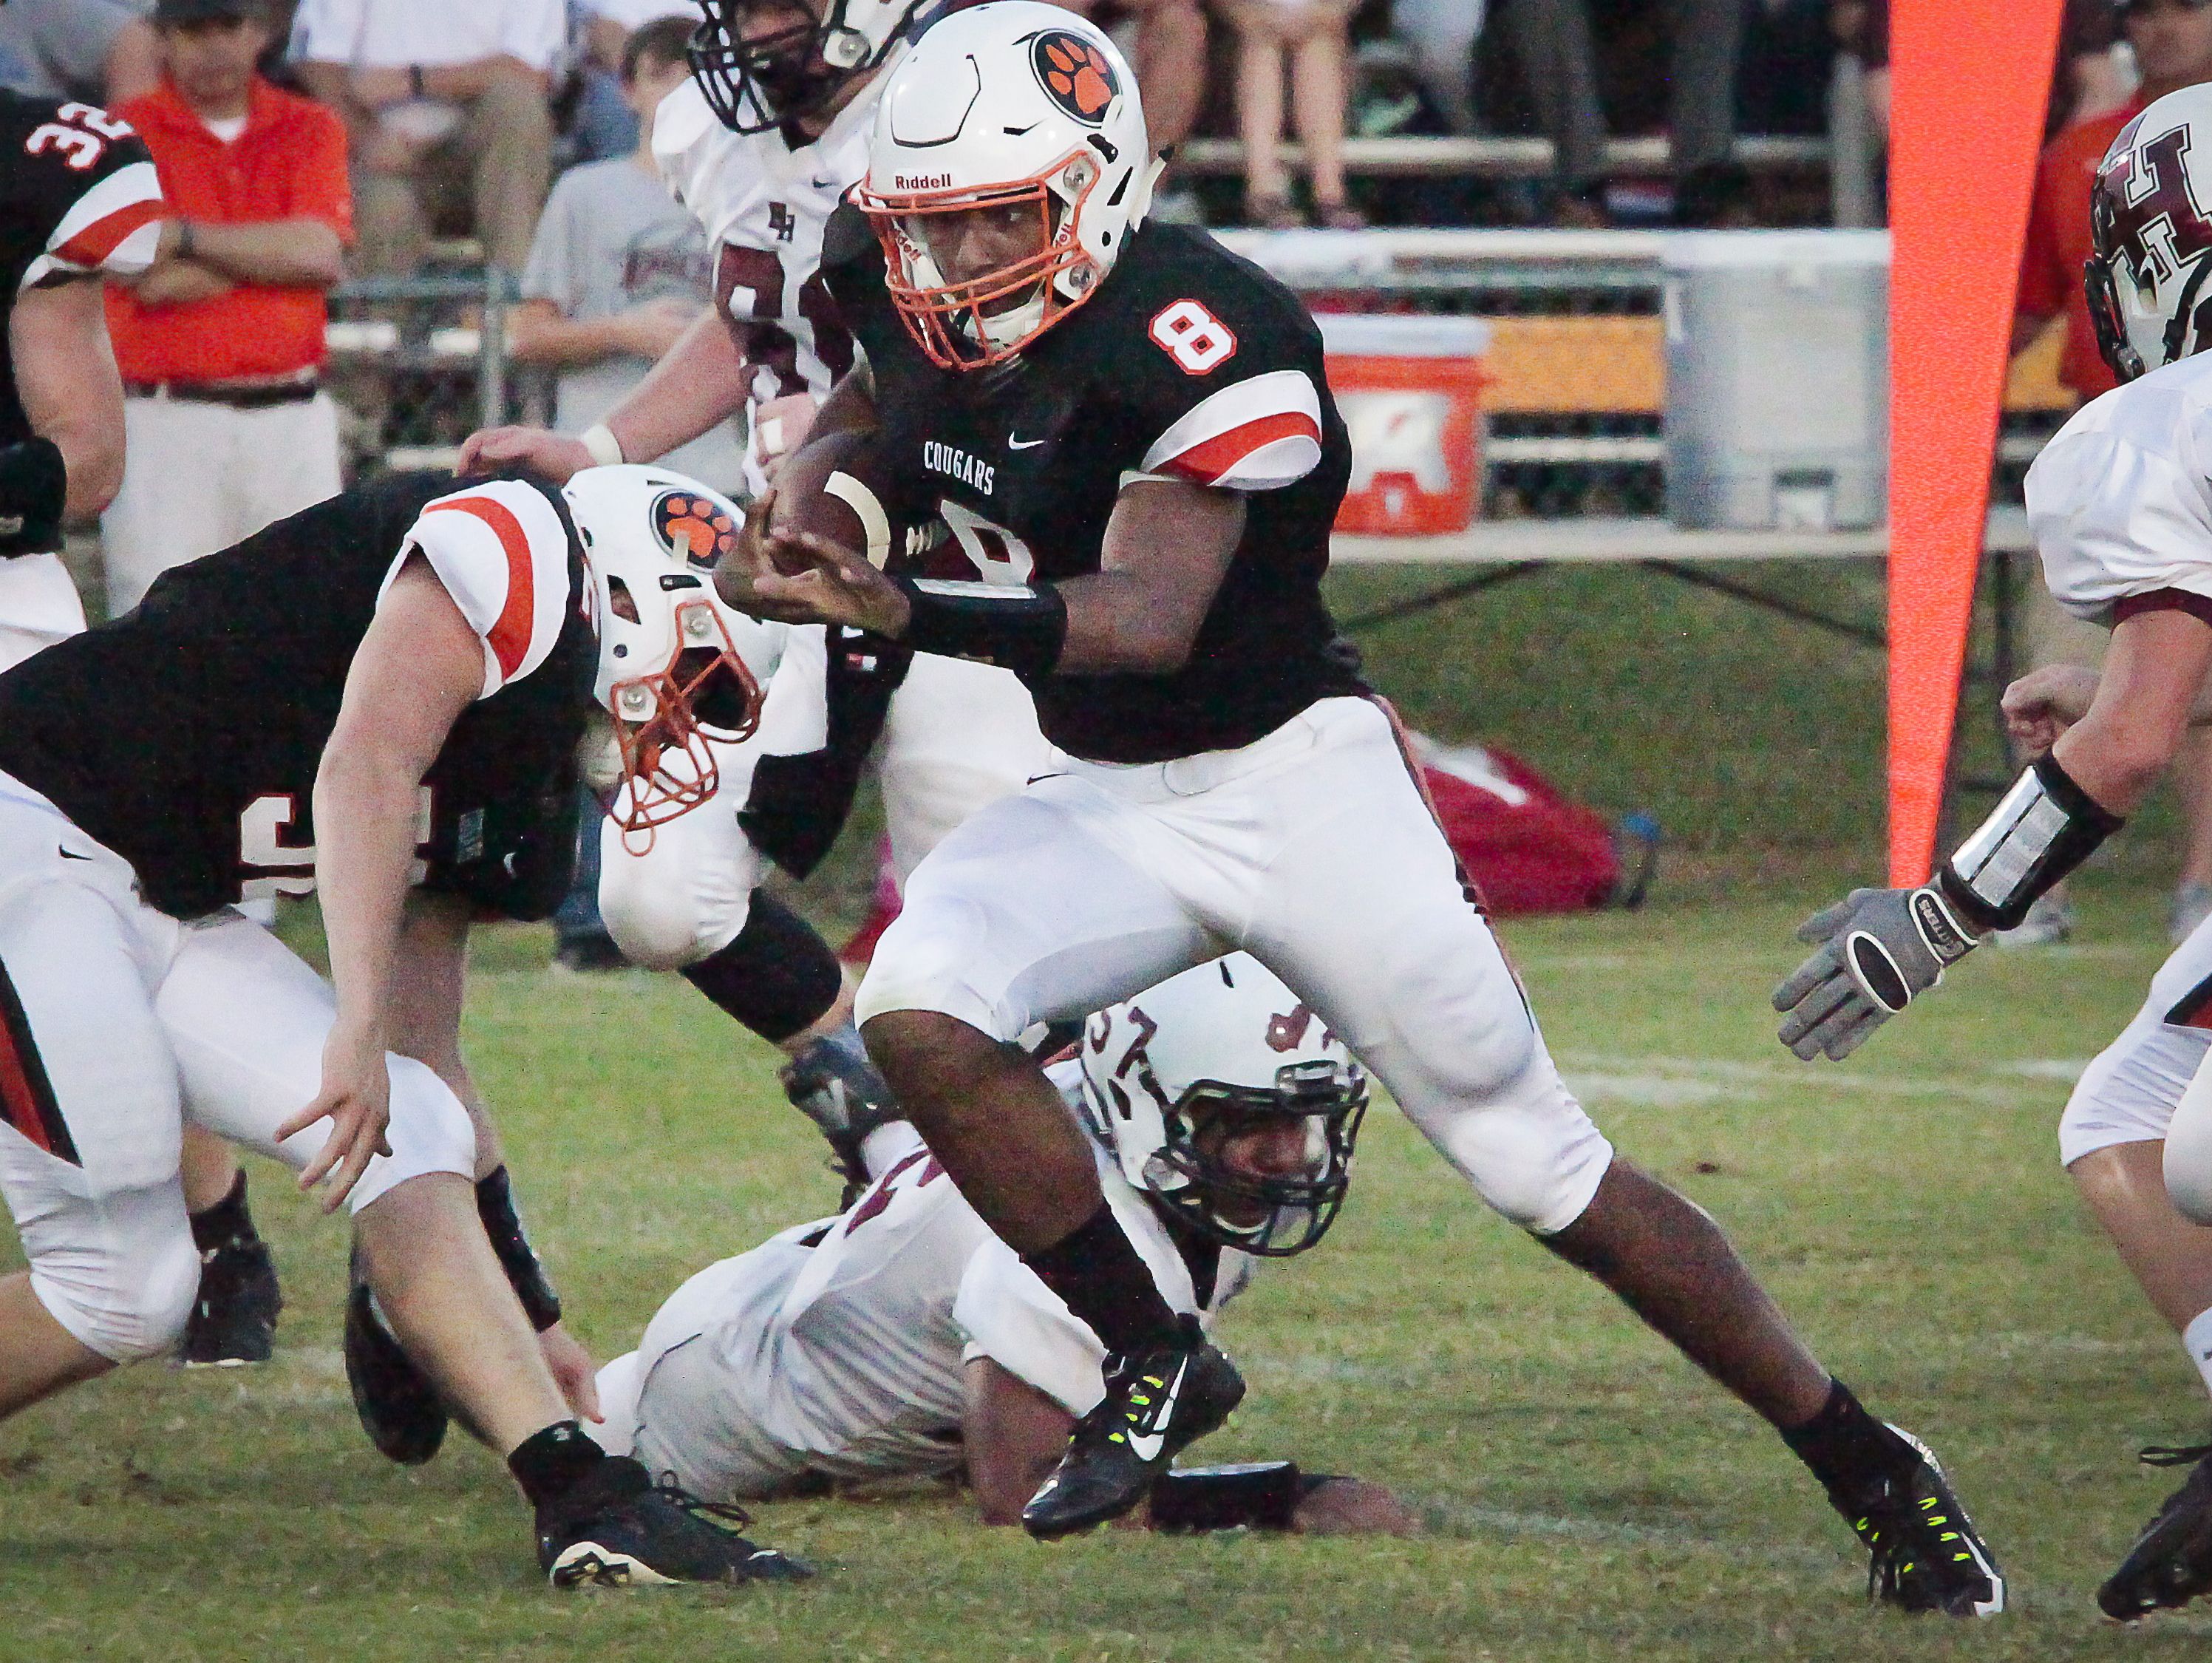 MTCS's Joseph Peck has led the Cougars to a 6-0 start as a dual-threat quarterback.